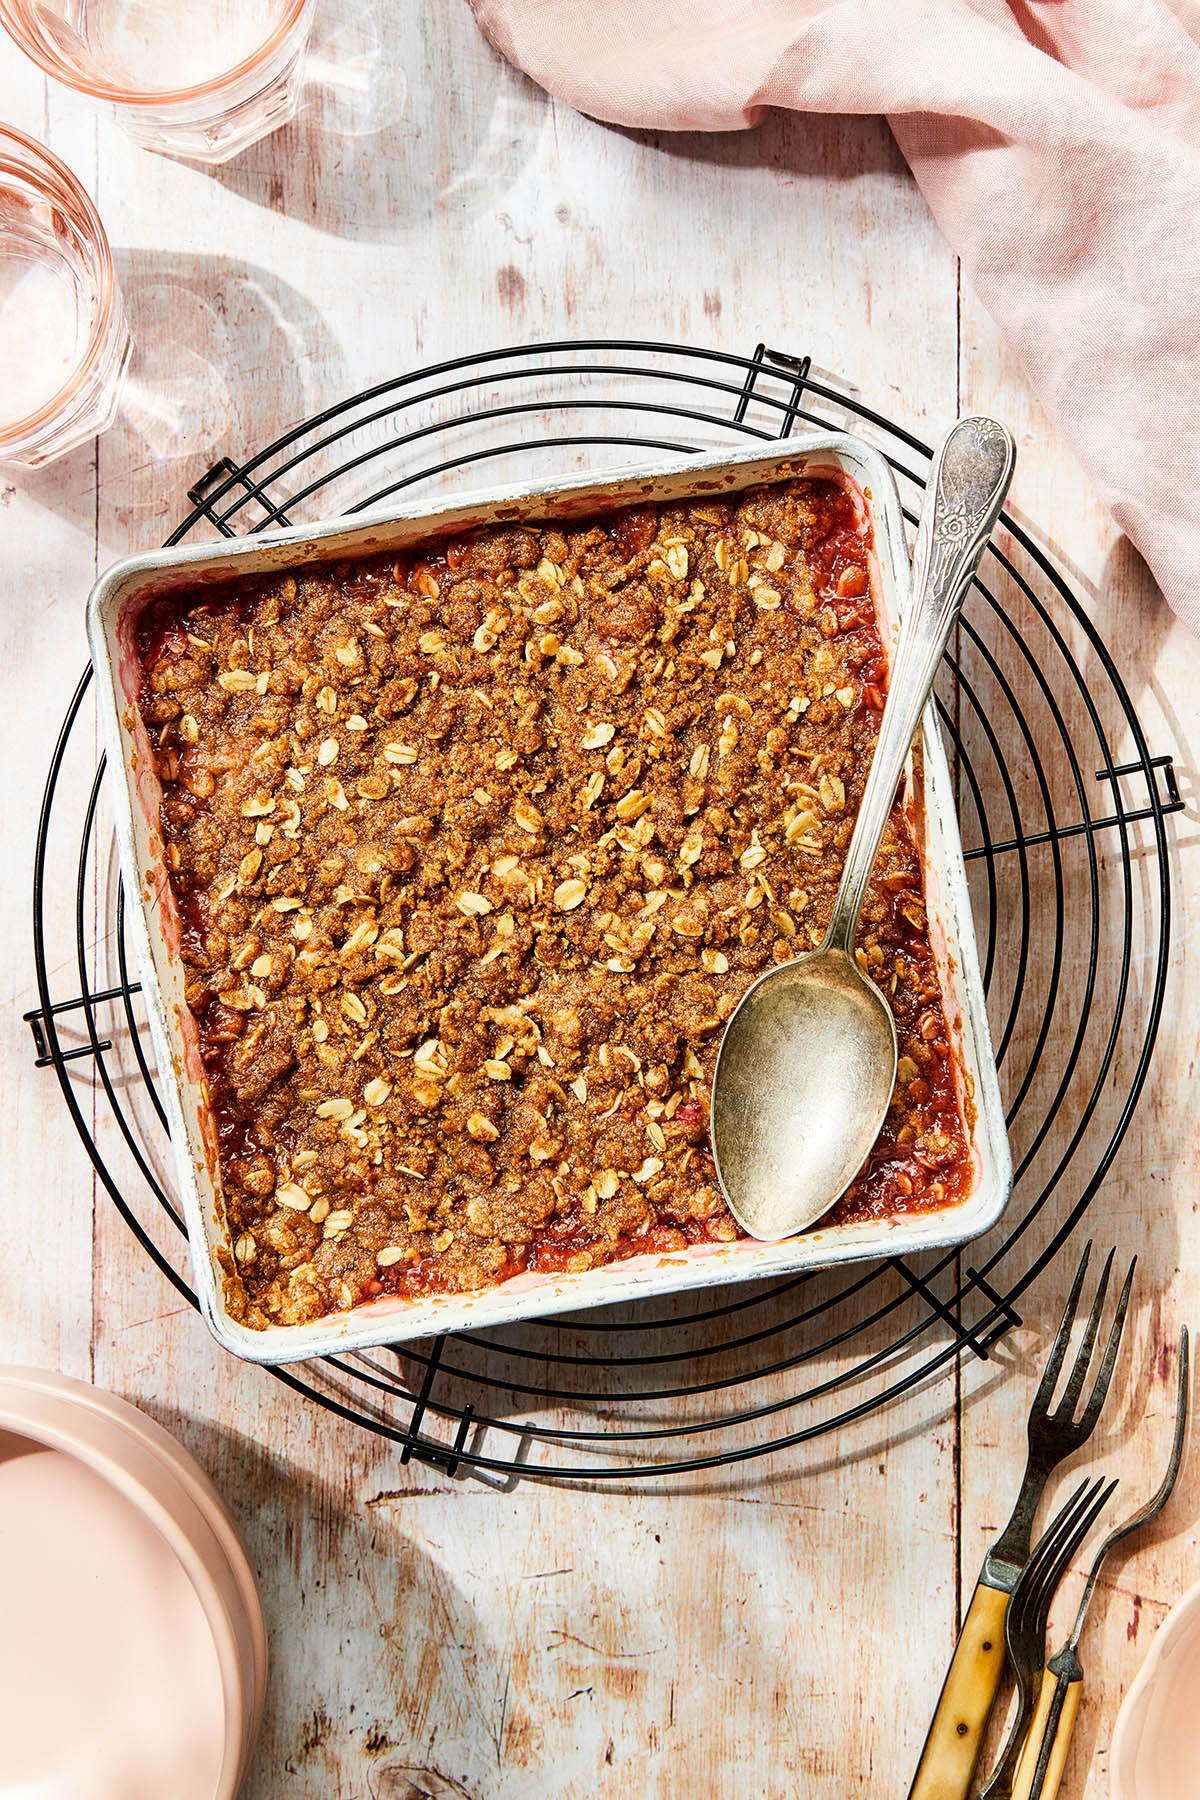 A square pan of baked gluten-free rhubarb crisp on a round wire cooling rack.